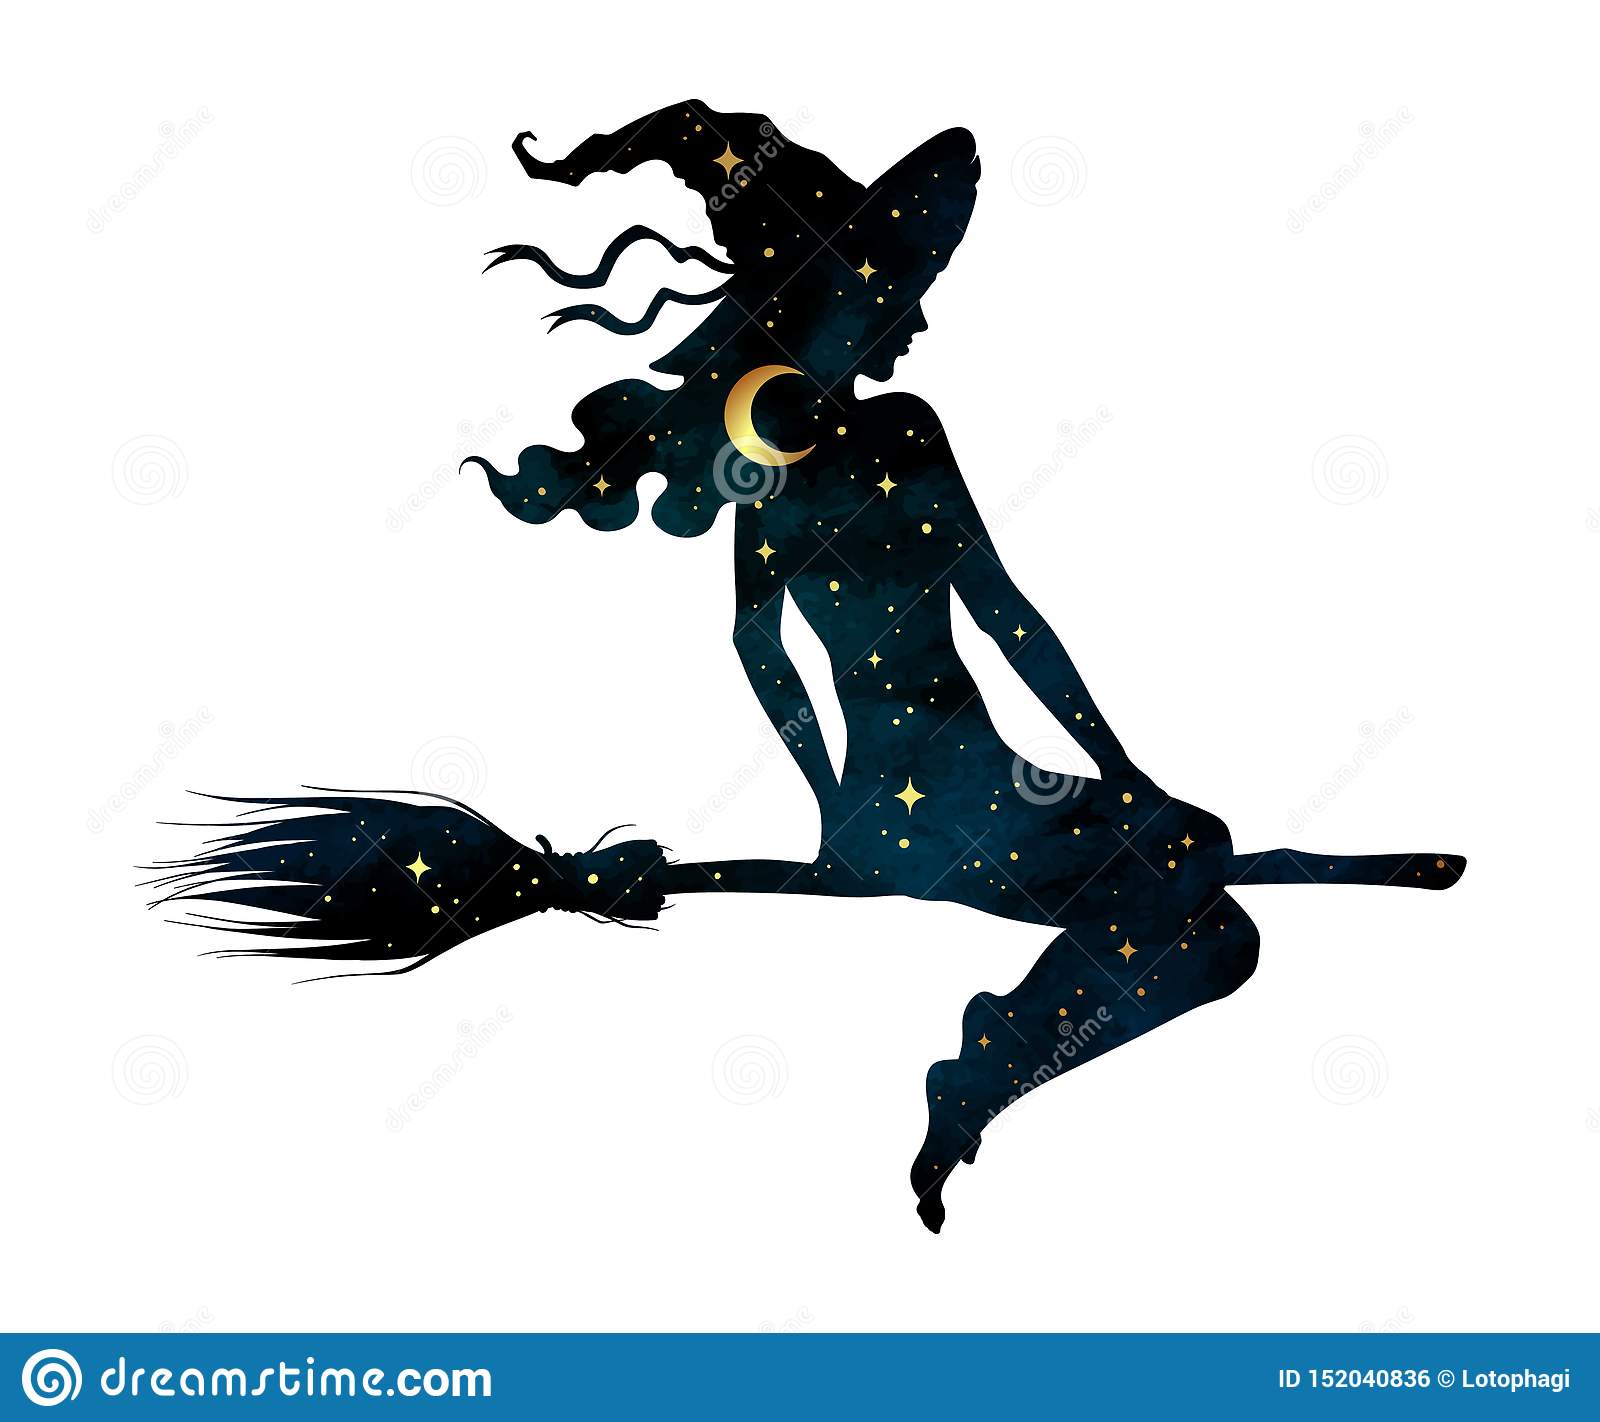 silhouette-beautiful-witch-girl-broom-crescent-moon-stars-profile-isolated-hand-drawn-vector-illustration-152040836